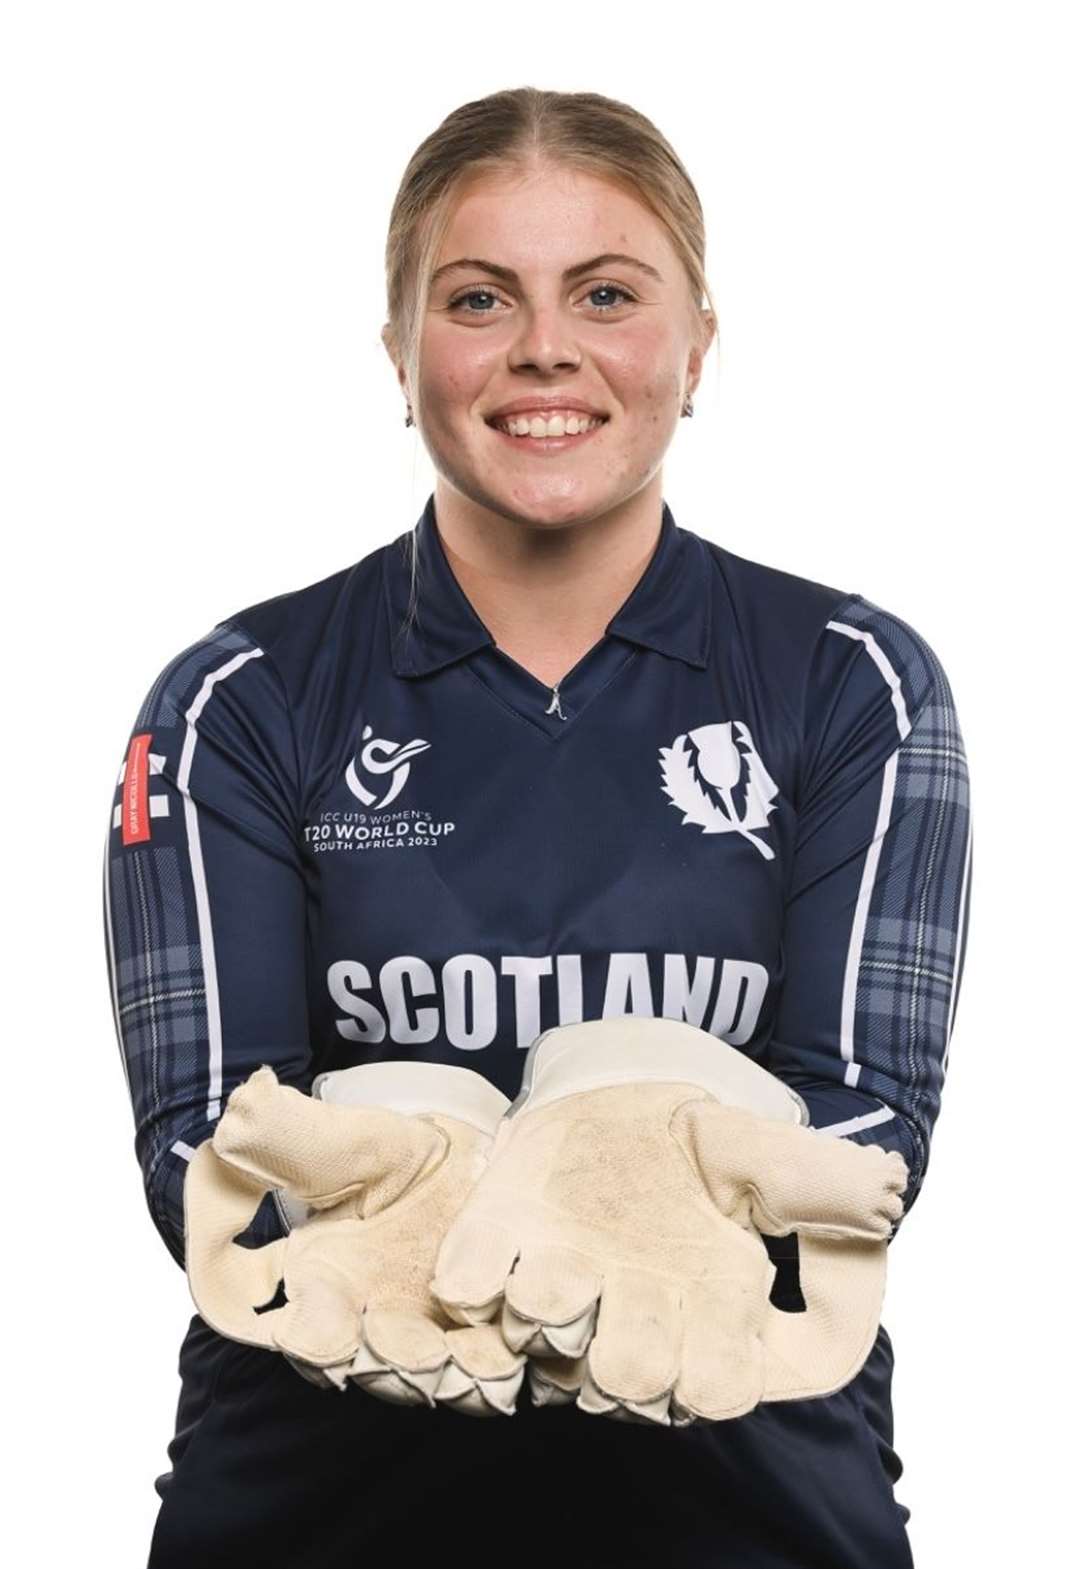 Ailsa Lister was part of Scotland's first-ever World Cup team in women's cricket.